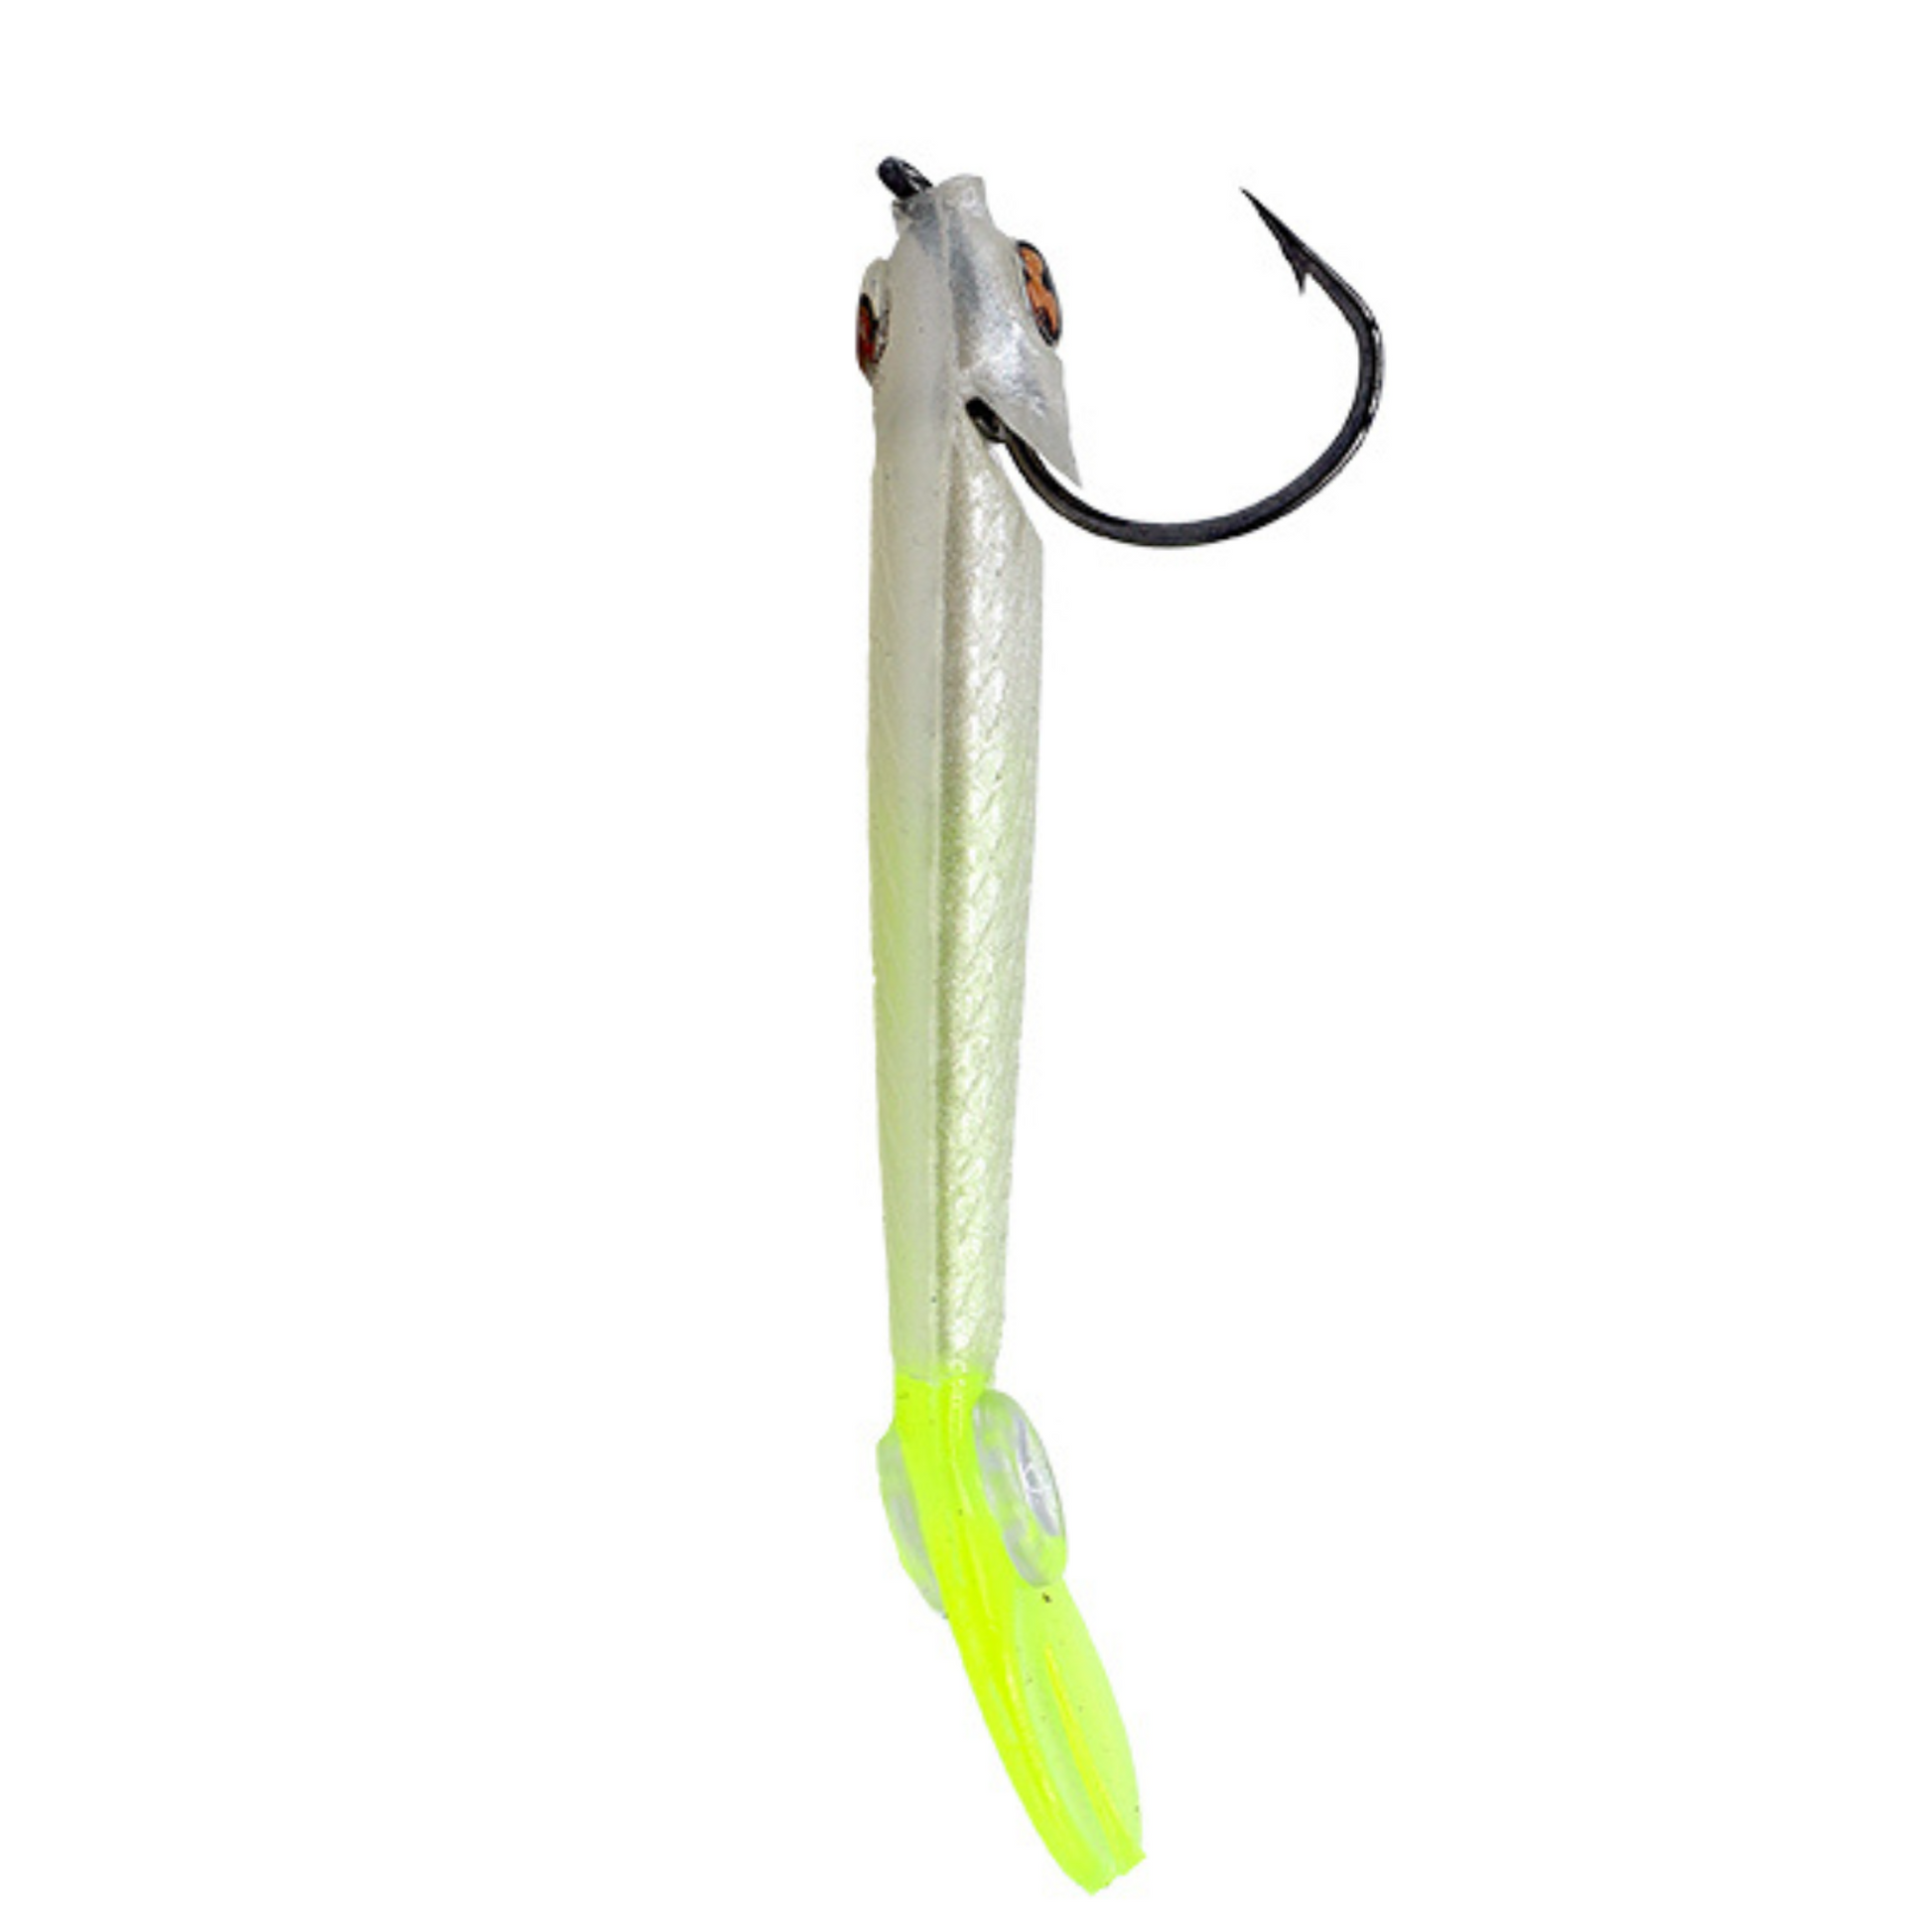 3.25 5pc. Recoil Baits - Pearl White w/ Chartreuse Tail – Lawless Lures